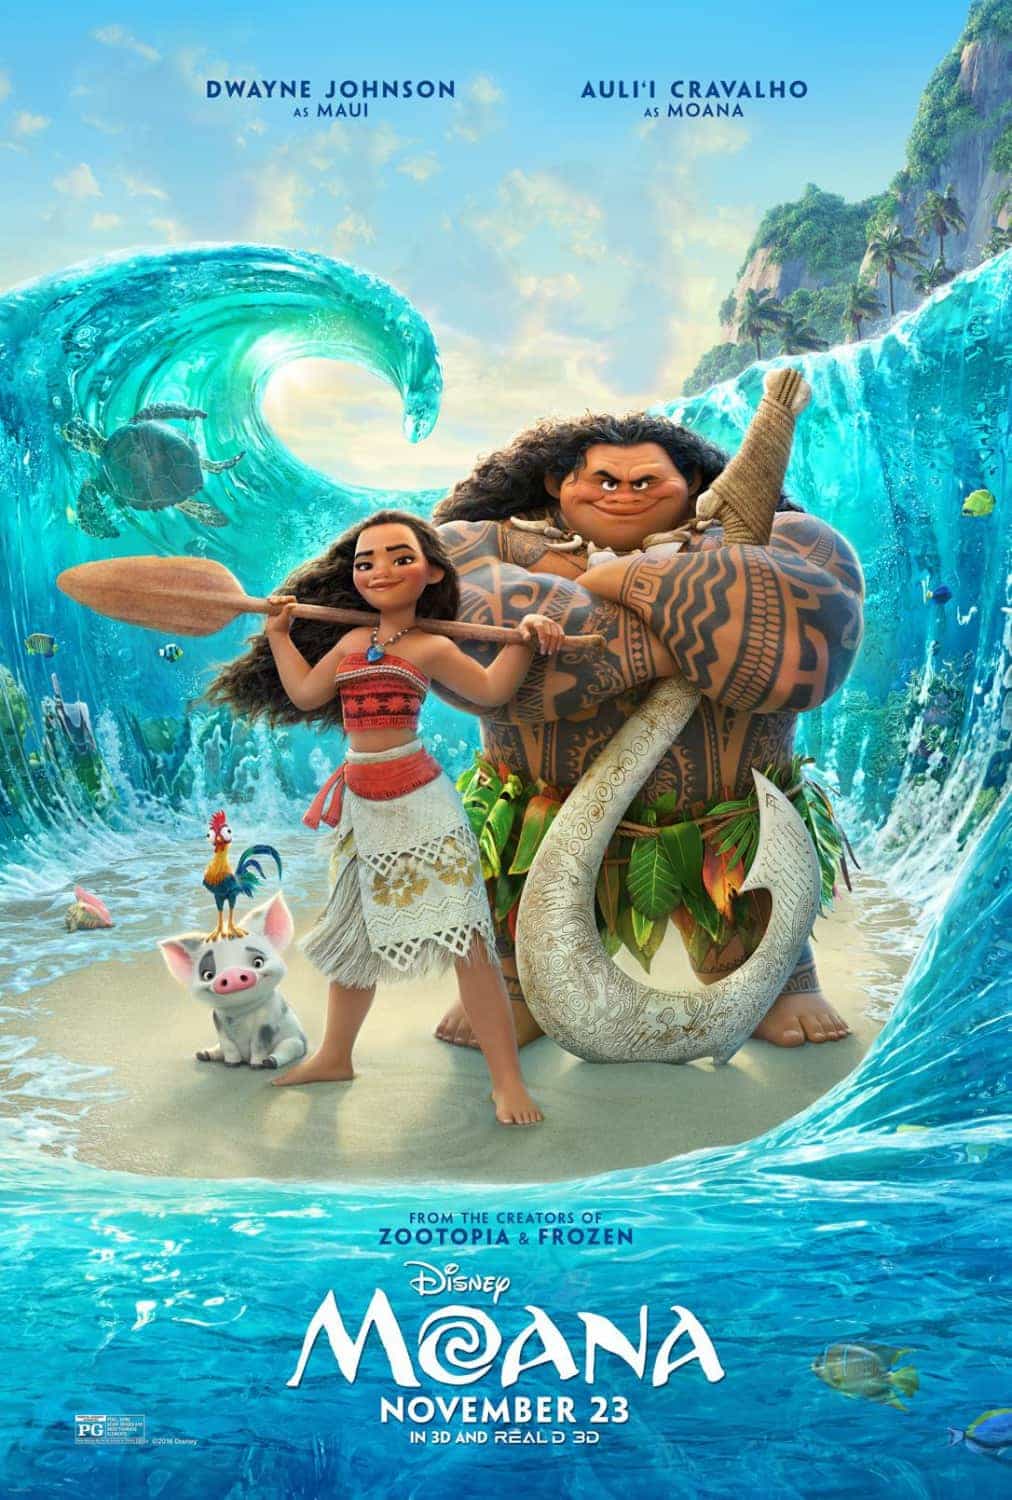 US Box Office Weekend 25th November 2016:  Thanksgiving weekend has Moana from Disney topping with $55 million